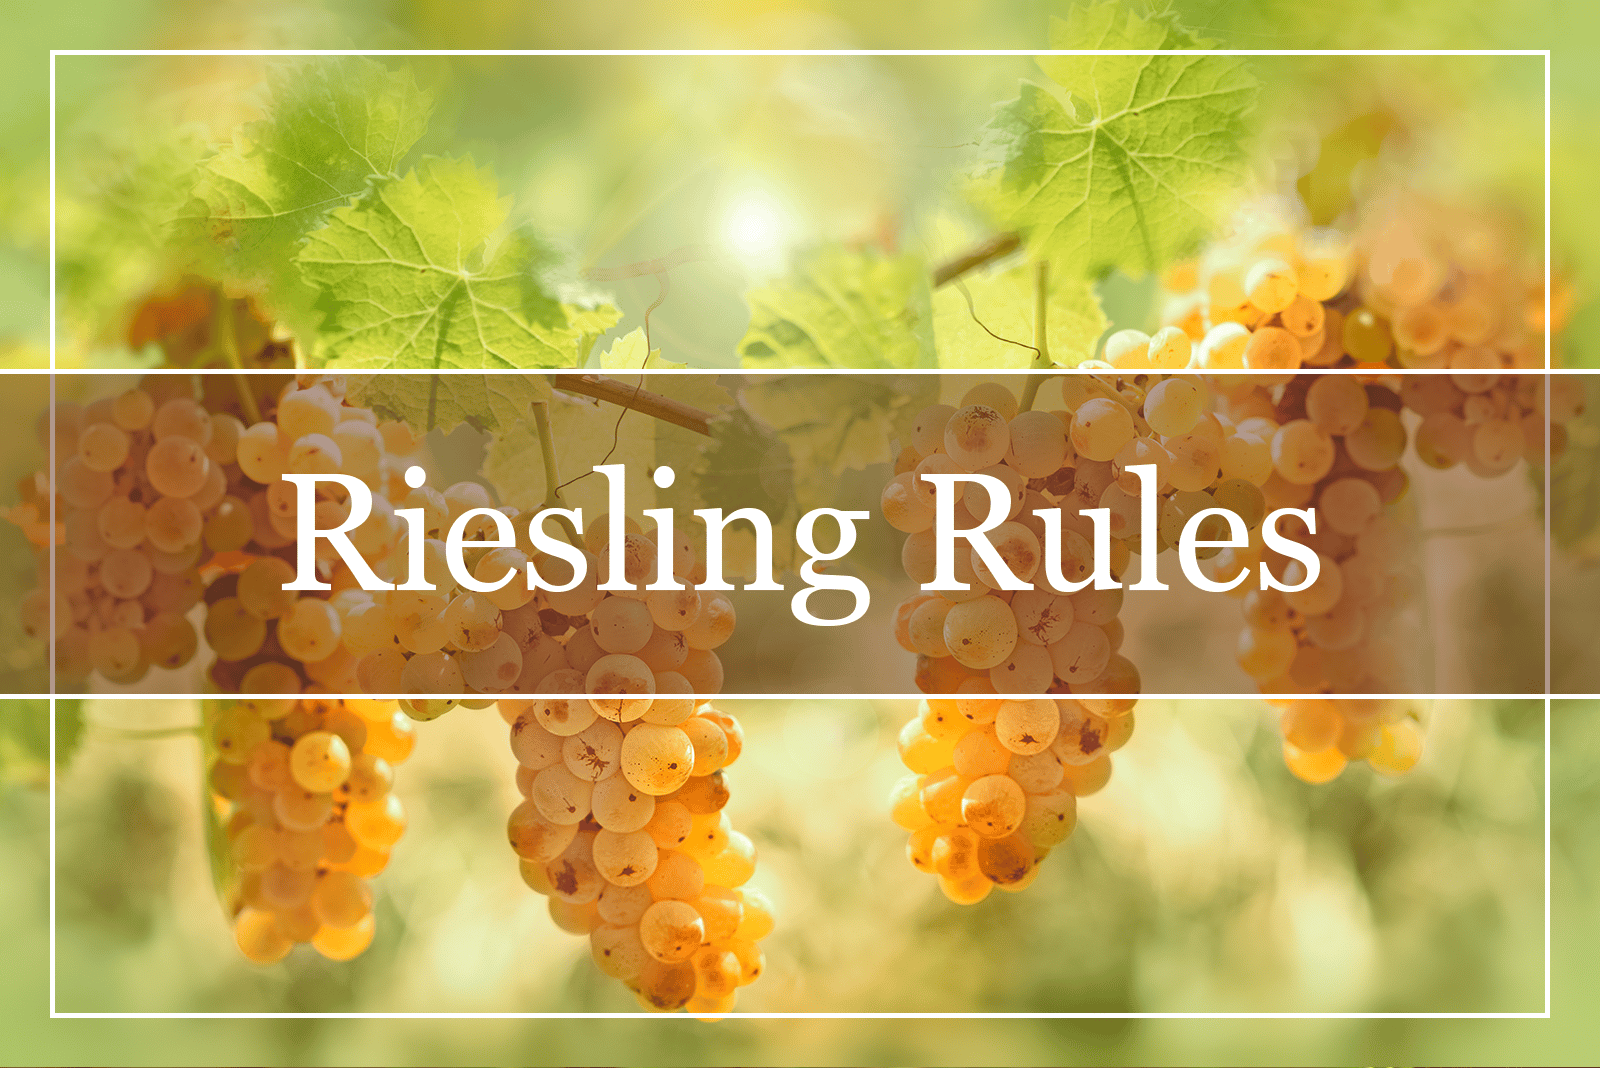 Riesling Rules!